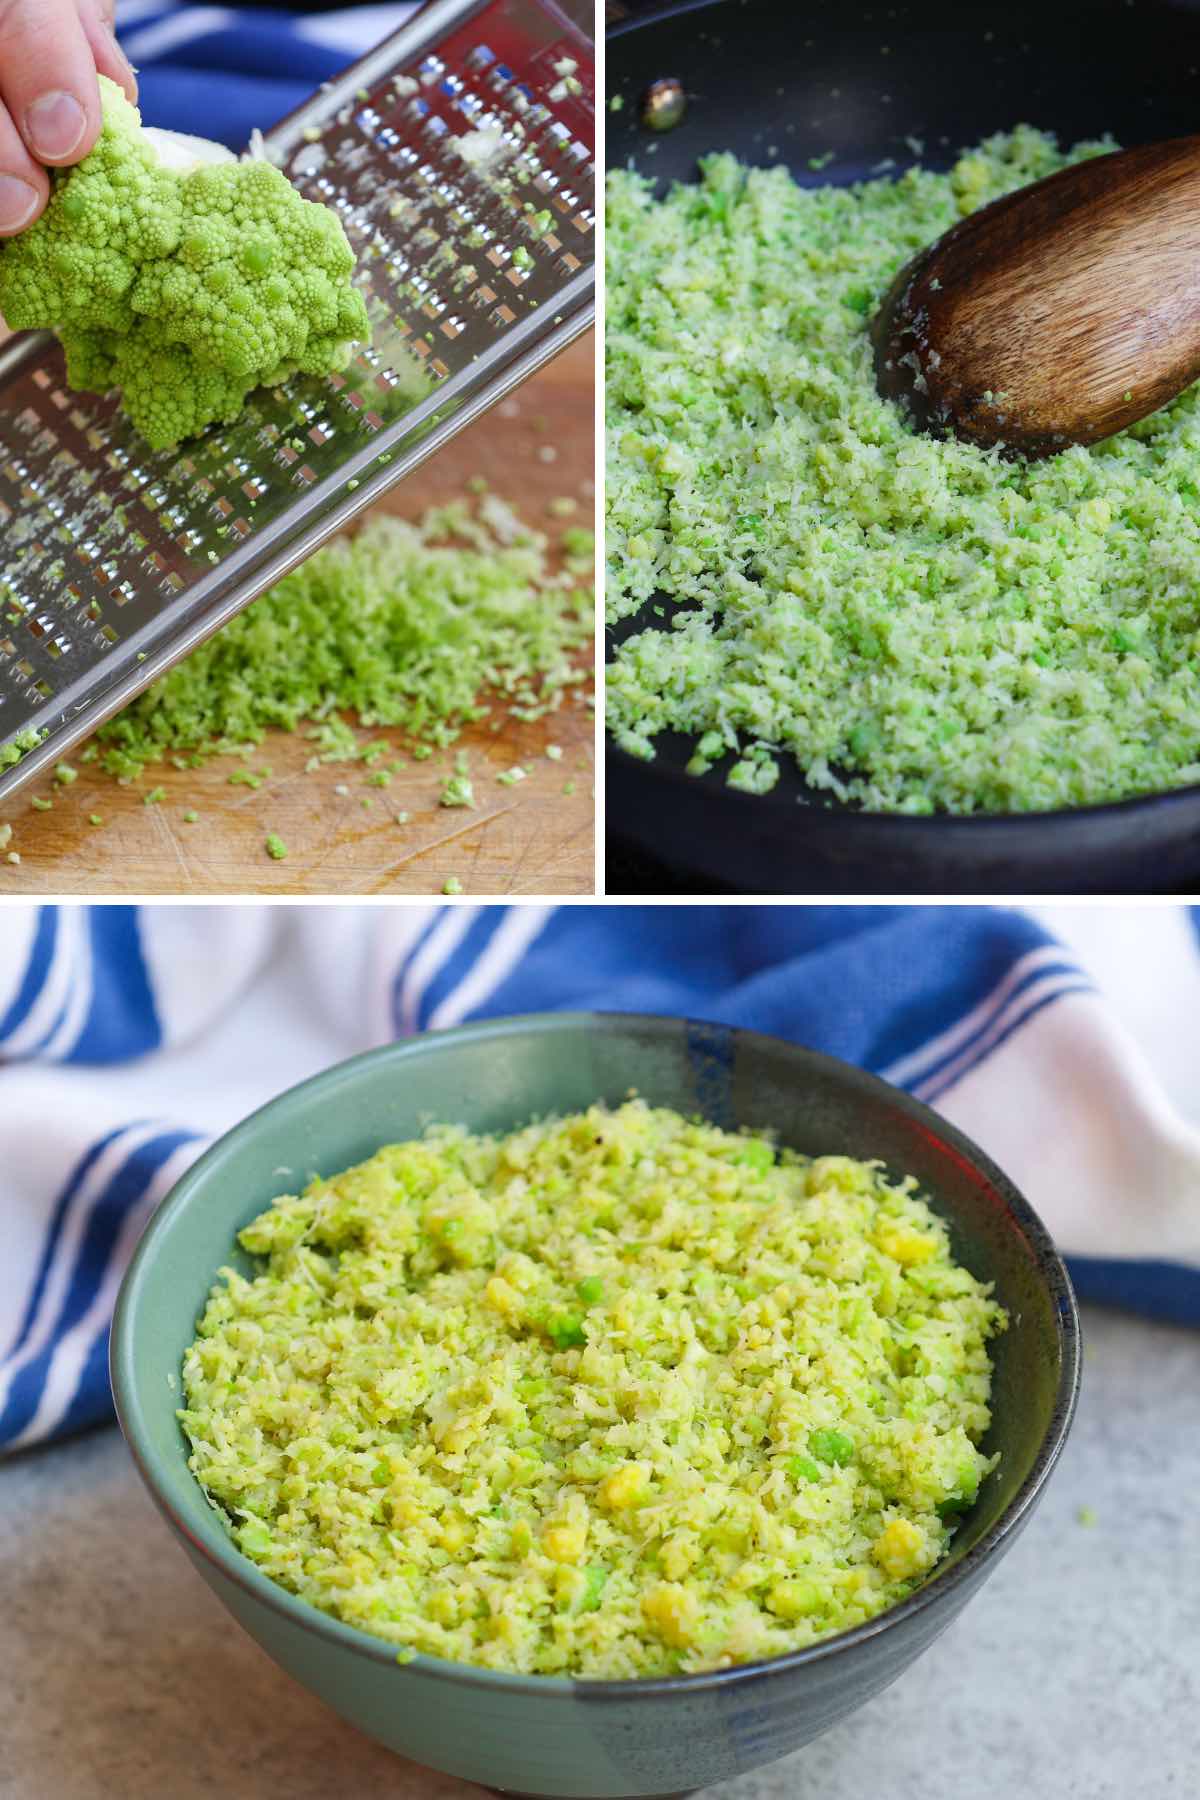 Preparing romanesco rice by grating, sauteing and service